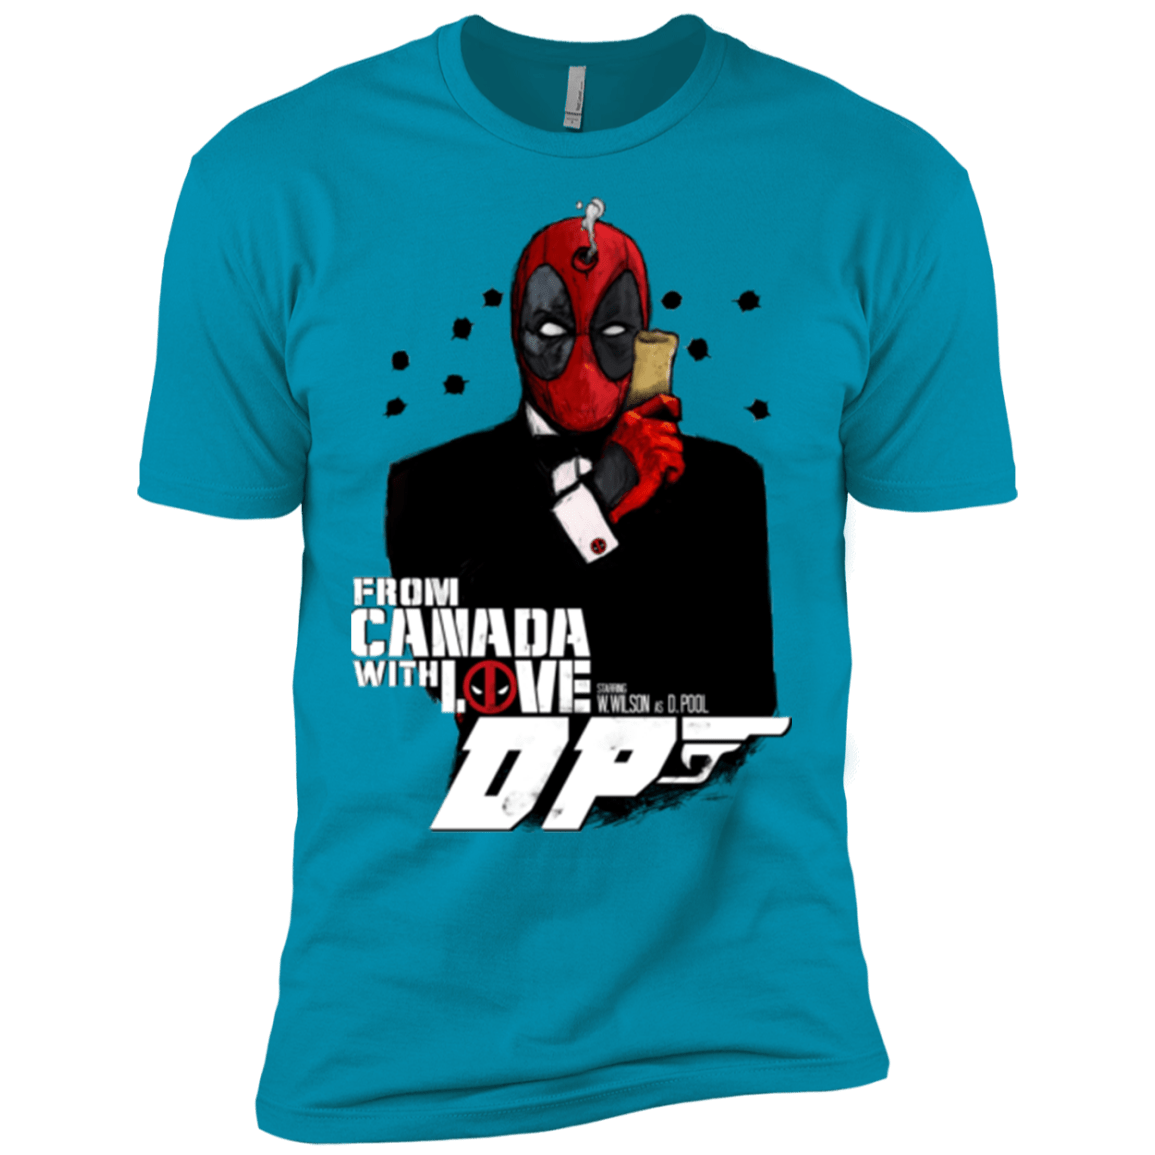 From Canada with Love Men's Premium T-Shirt